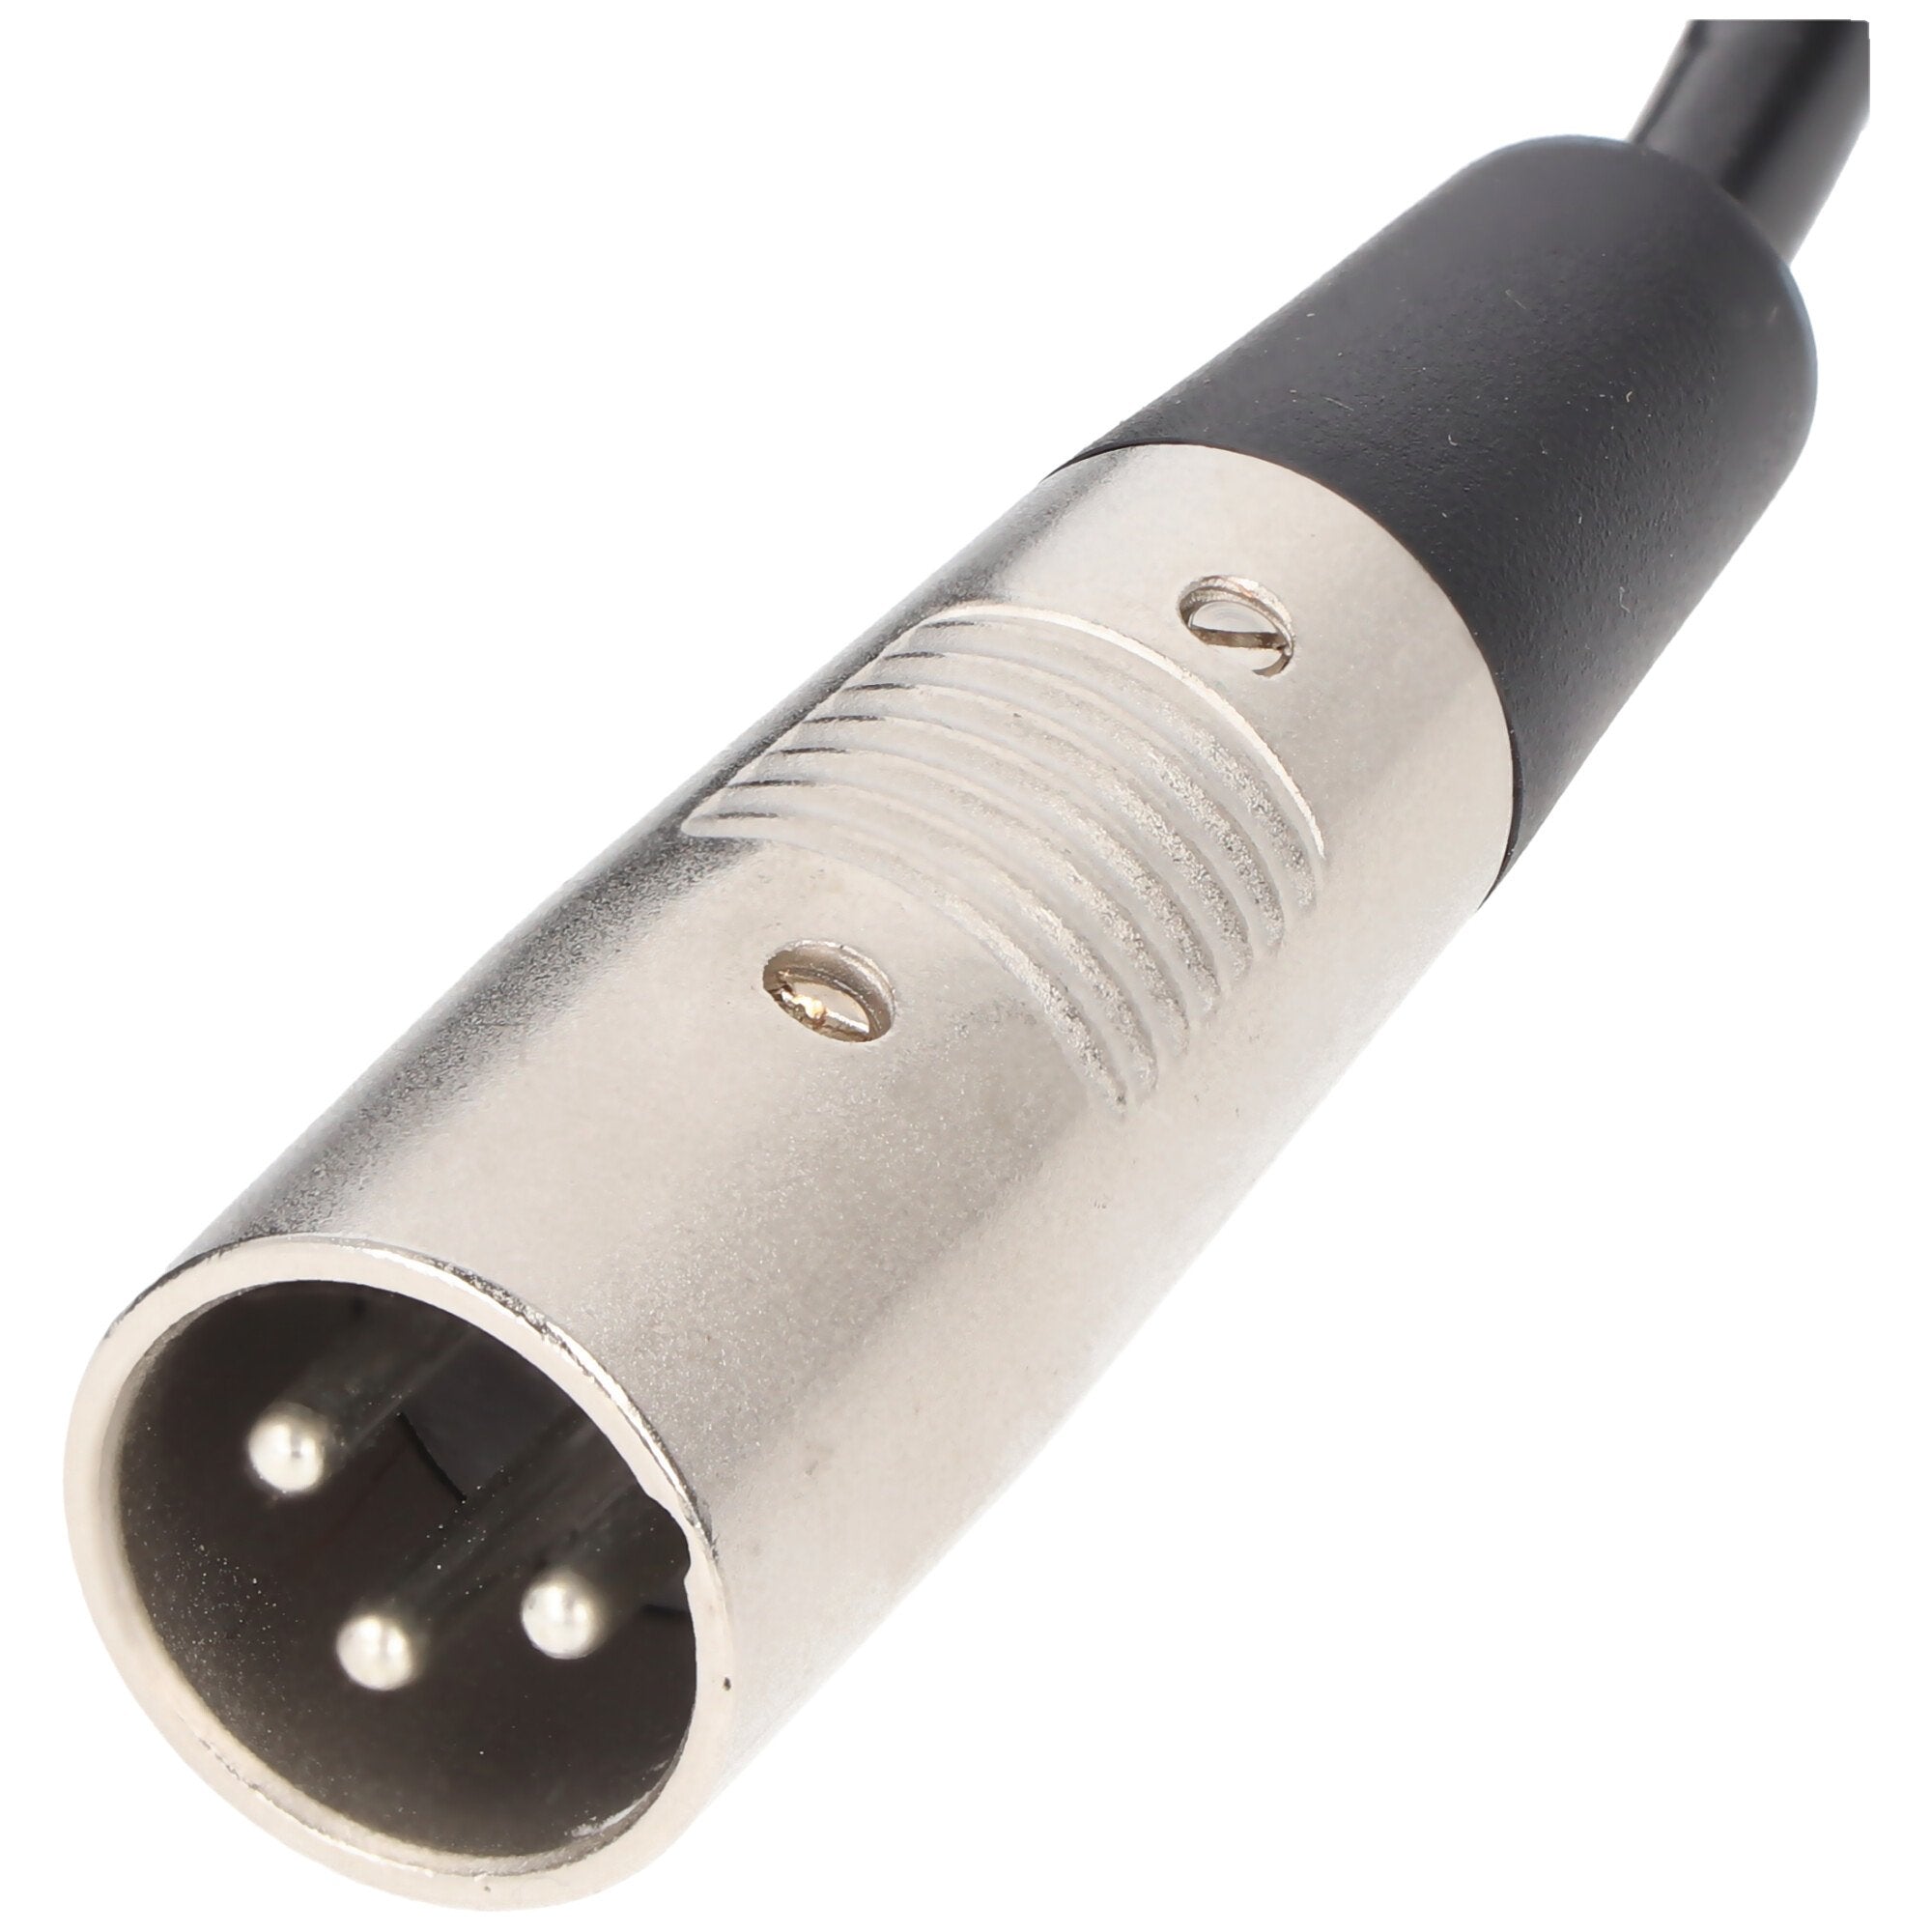 Charger only suitable for Phylion charger 36-42 volts 2.0A XLR 3-pin